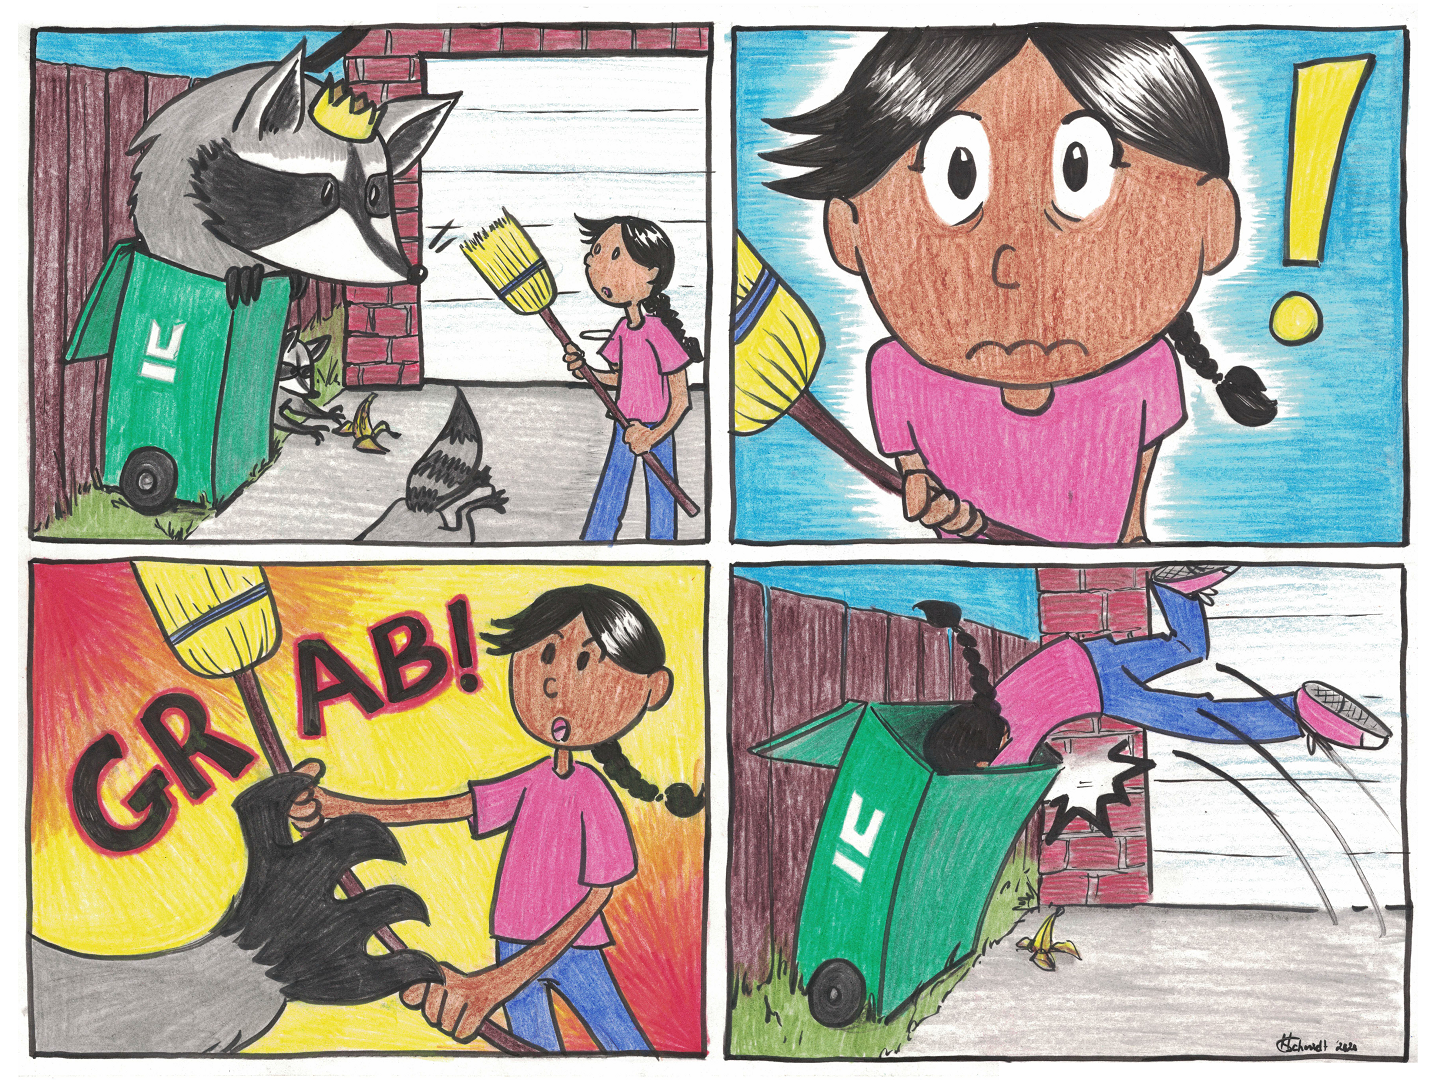 A four panel comic. Panel 1: A young girl with brown skin and black hair holds a broom while she stands in front of a green garbage bin. Two raccoons play around the bottom of the bin while a giant raccoon wearing a crown on her head fills the top of the open bin. Panel 2: The girl looks up in shock and alarm. Panel 3: The Raccoon Queen’s hand reaches in from off panel toward the broom. The text “GRAB” appears across the panel. Panel 4: The girl is pulled into the garbage bin.